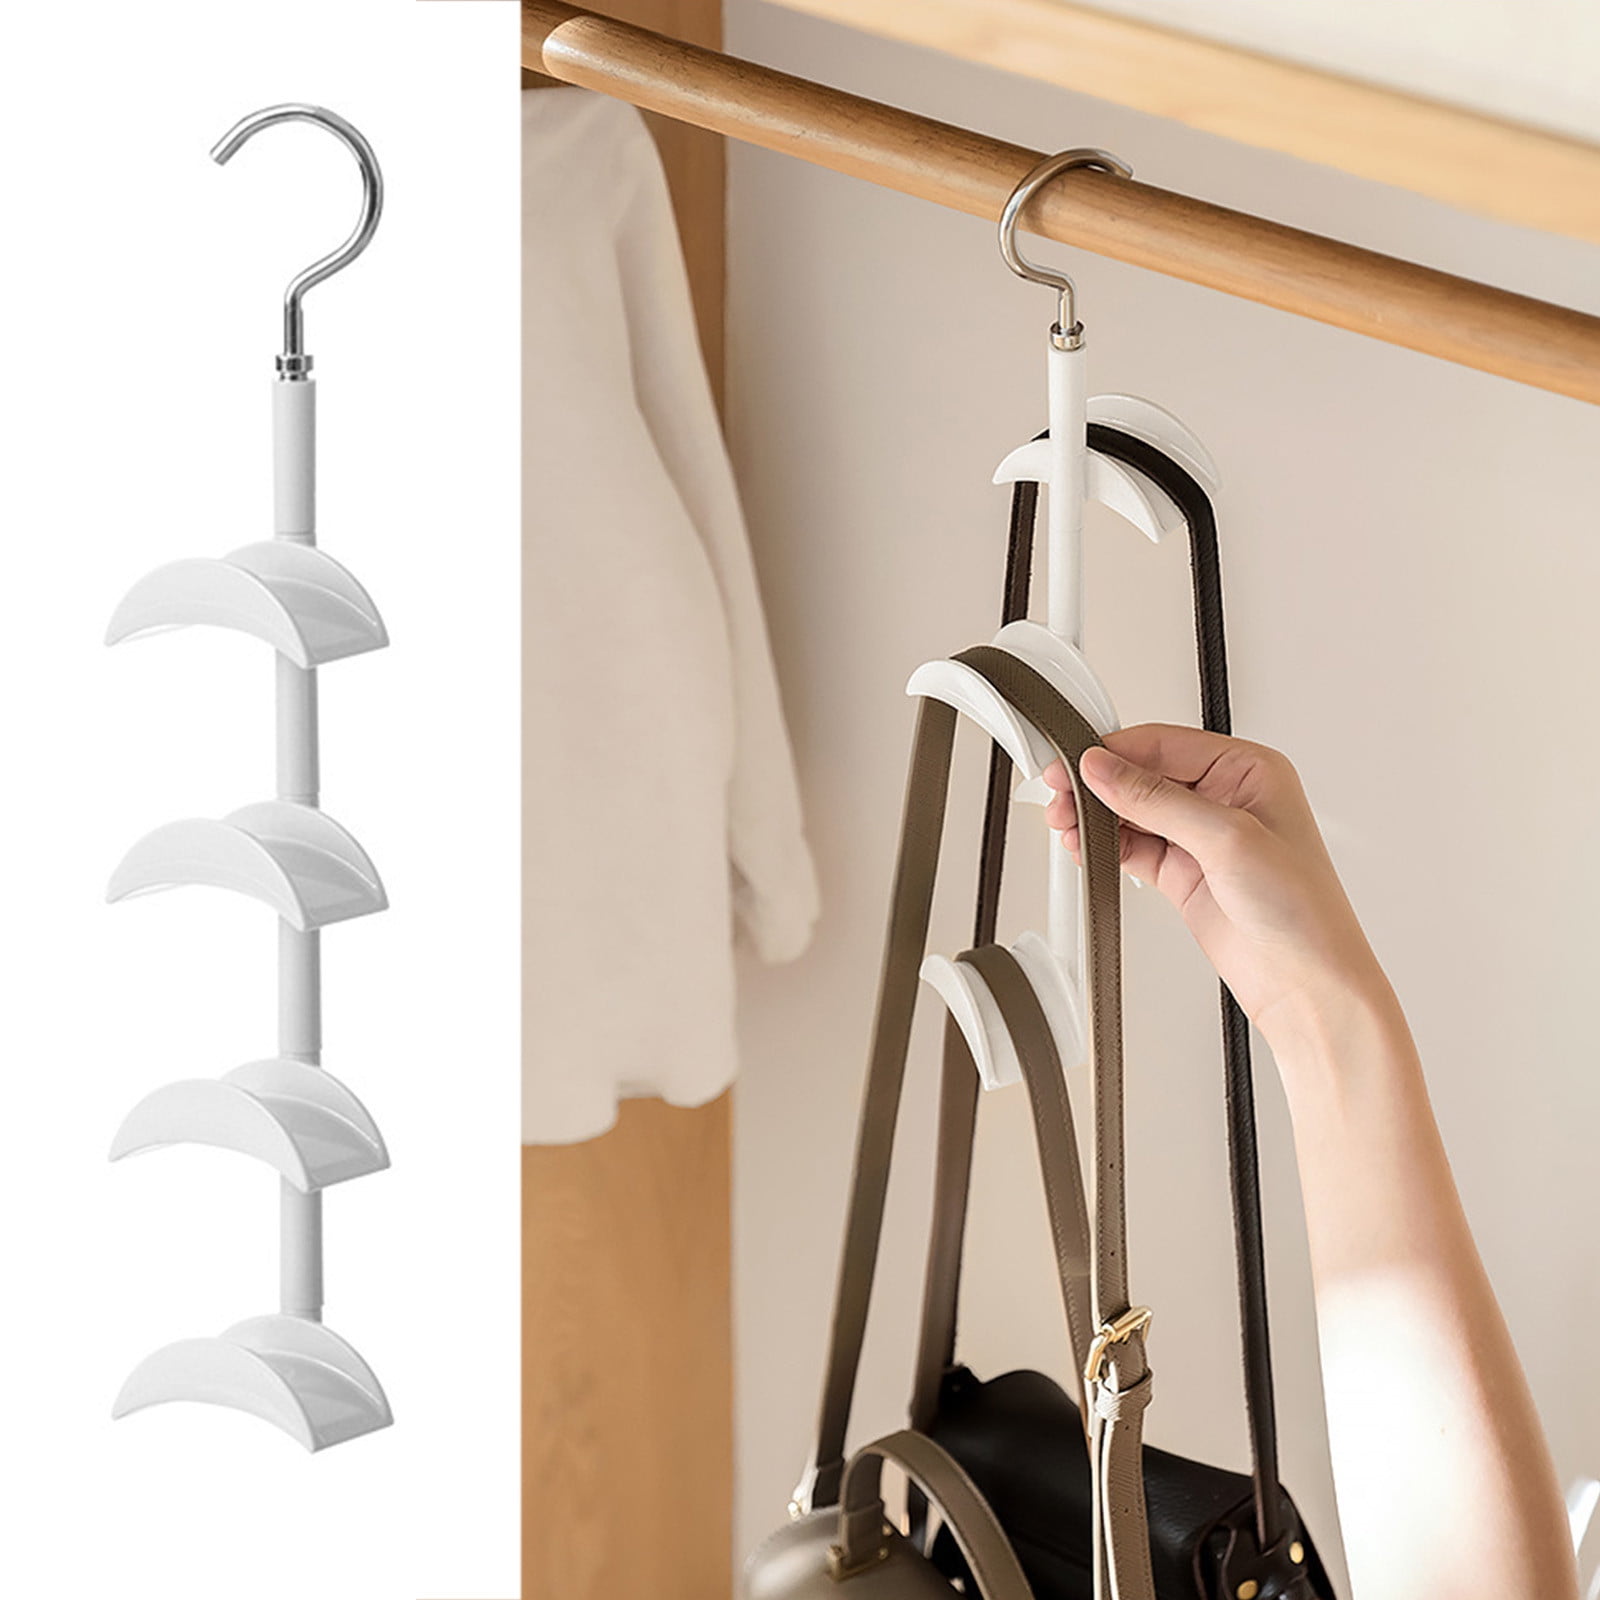 echinff Purse Hangers for Closet, S-Shaped Anti Scratch Hooks for Closet  Purse Organizers and Storage,4 Pack Unique Twist Hangers with Double Soft